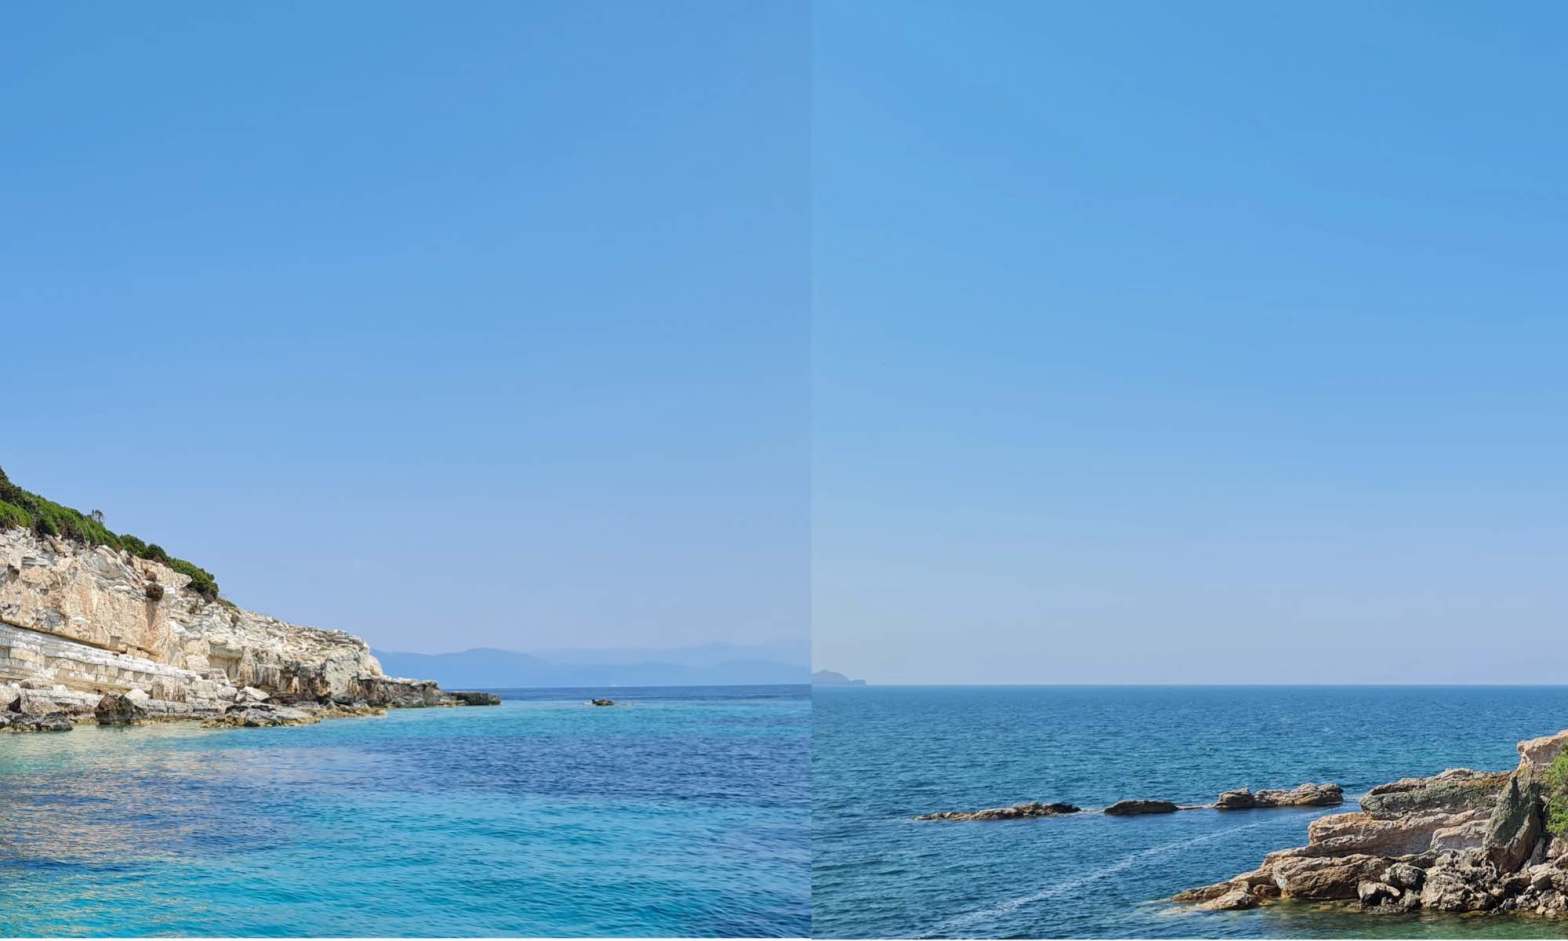 Left is the blue Ionian sea with a white cliff and on the right the more turquoise aegean sea with grey rocks